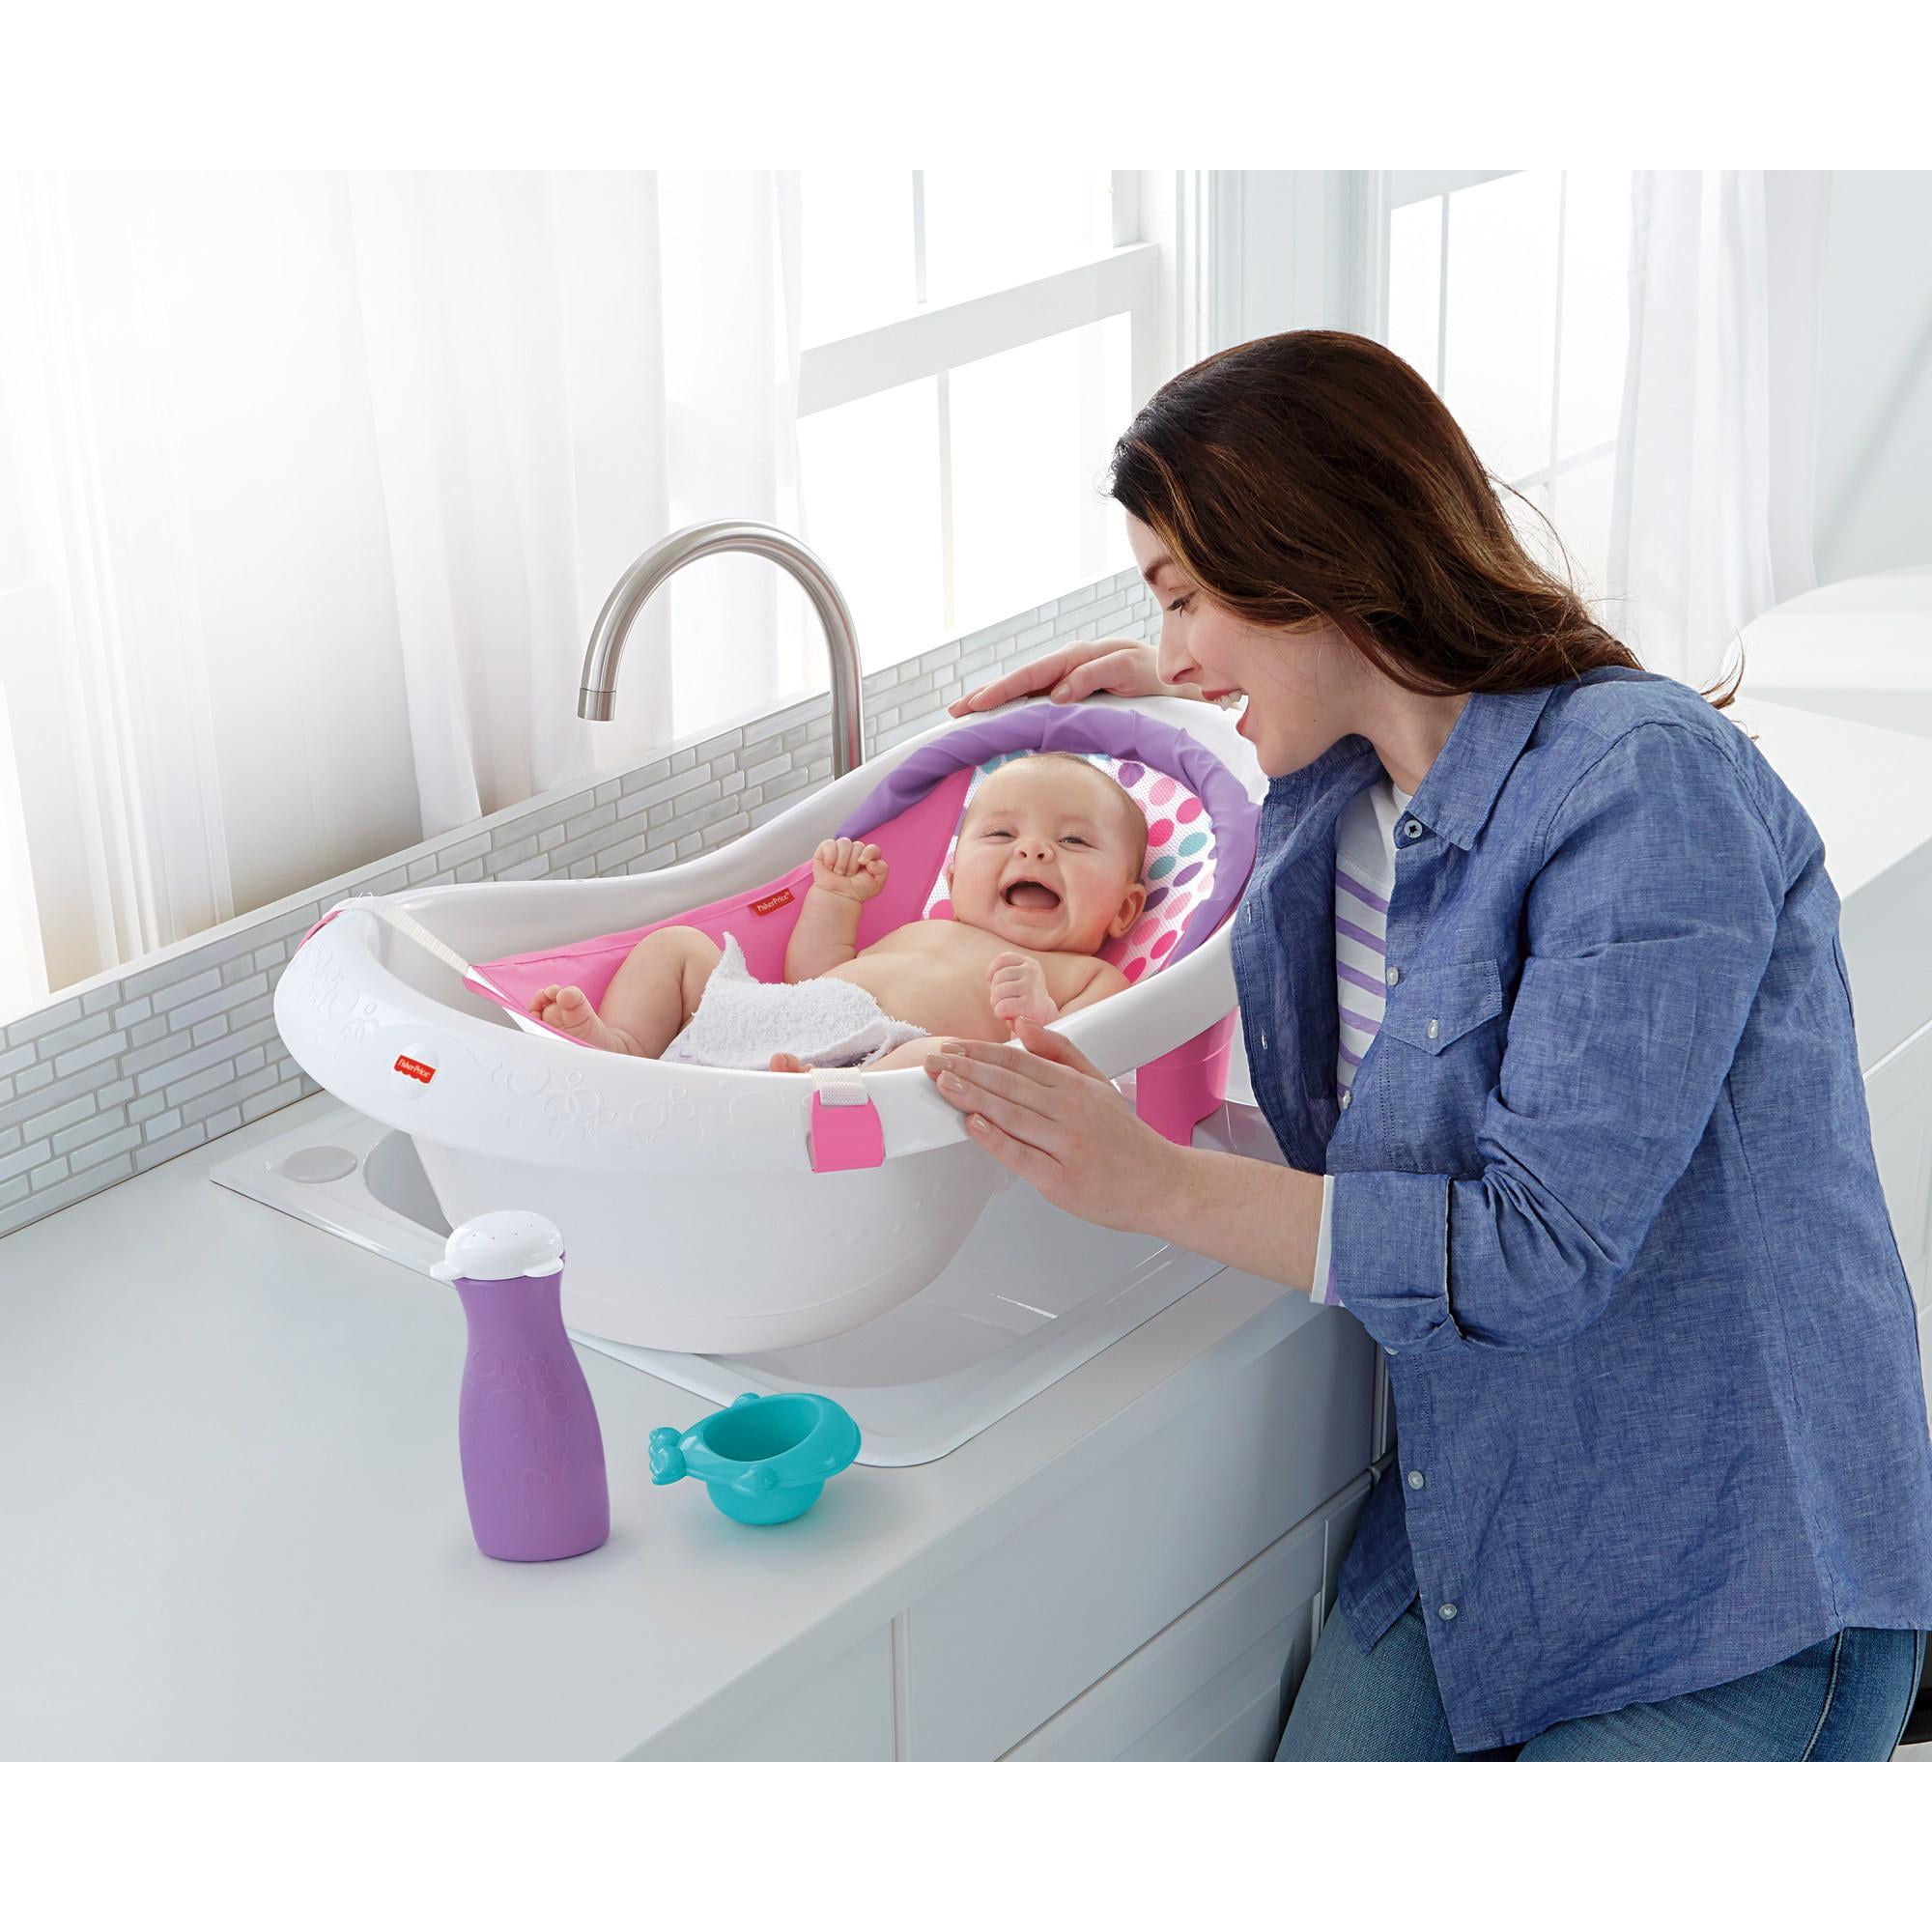 Baby Bath Time Splash&Play Pink Bath Tub With Support Sling & FREE Rinser+Bottle 